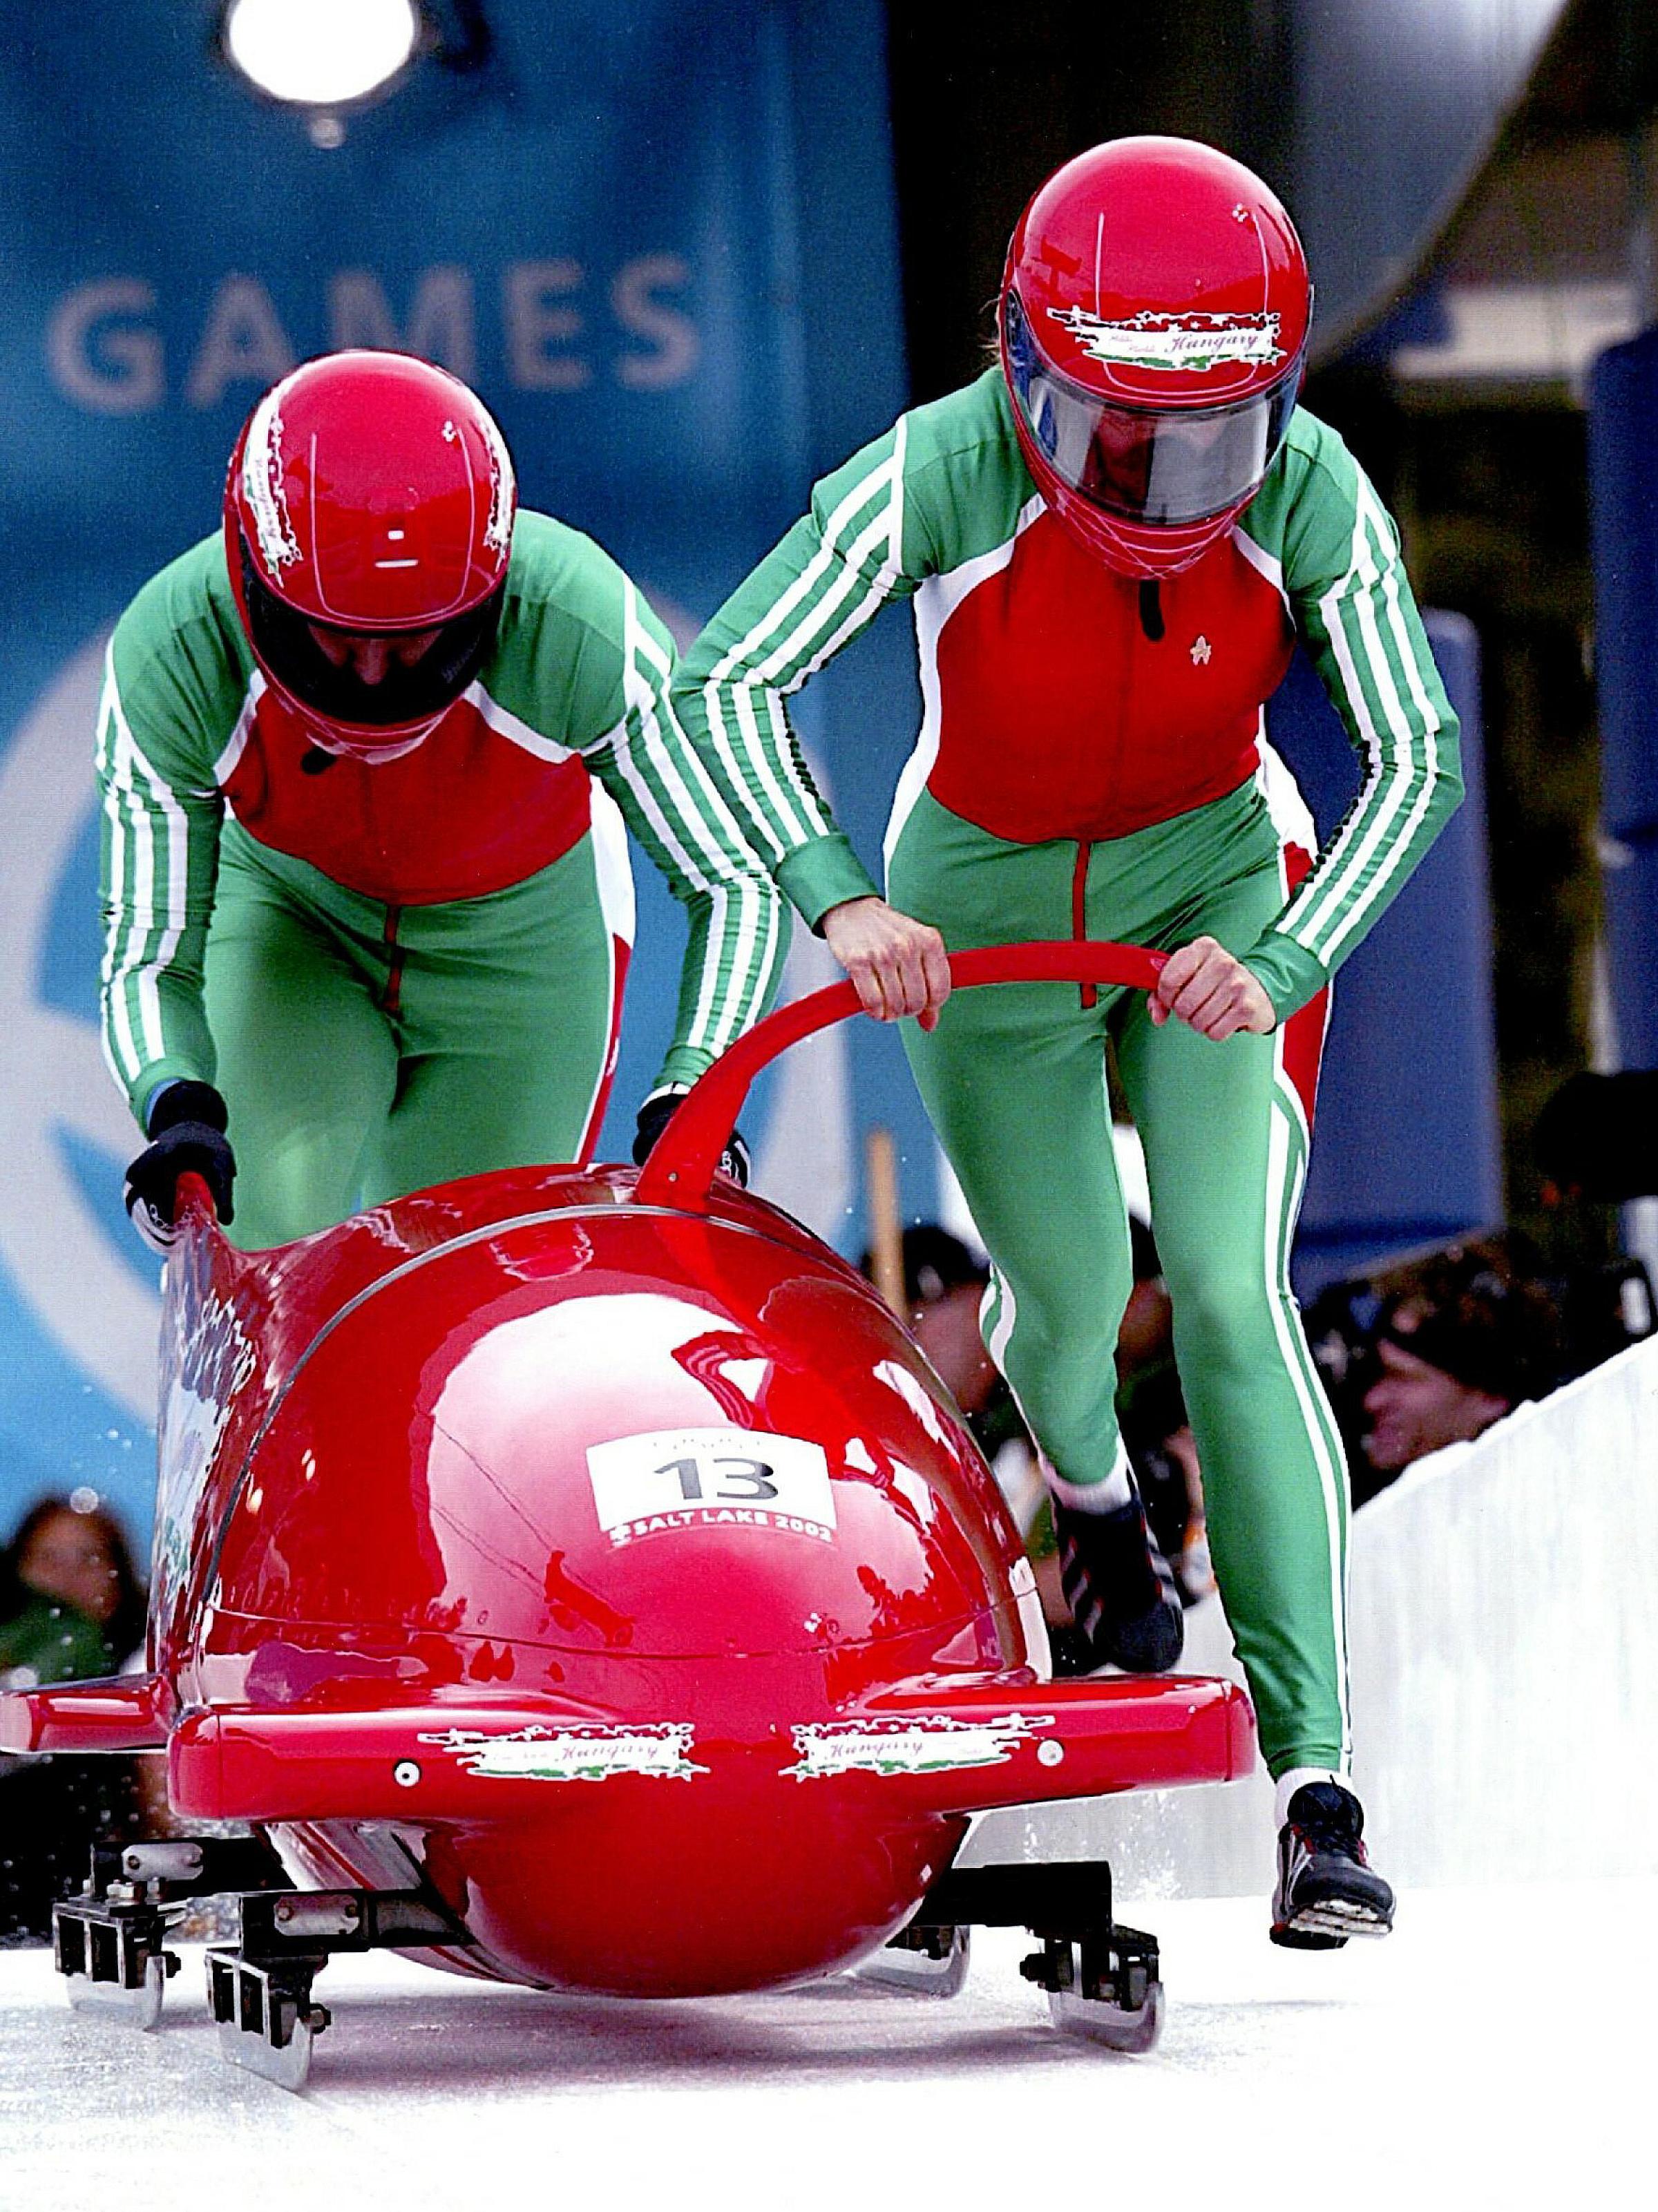 Ildiko Strehli competes in the Olympic Winter Games of 2002 in Women's Bobsled for Hungary